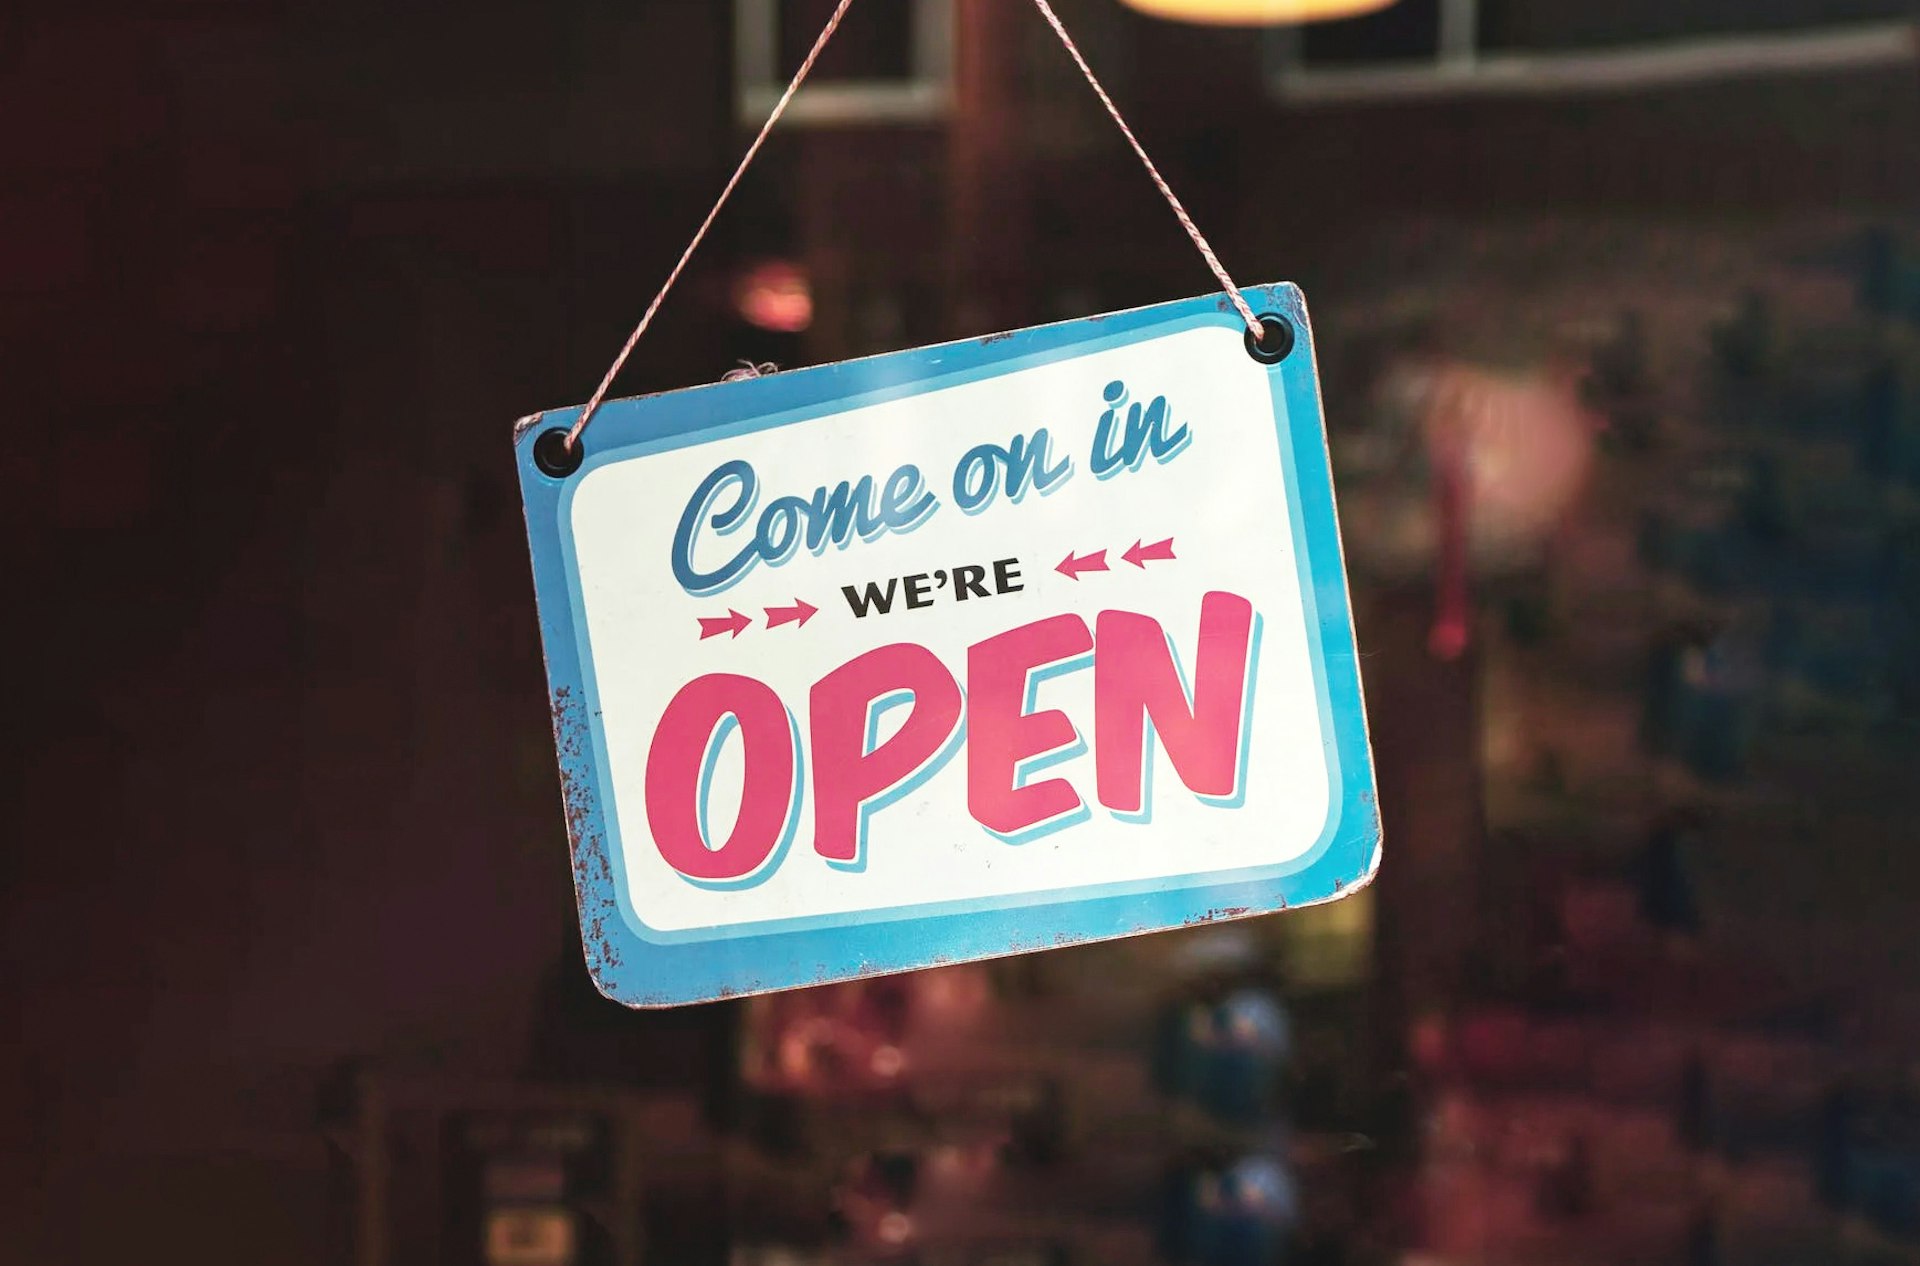 A sign hanging in a doorway that says 'come on in, we're open'.